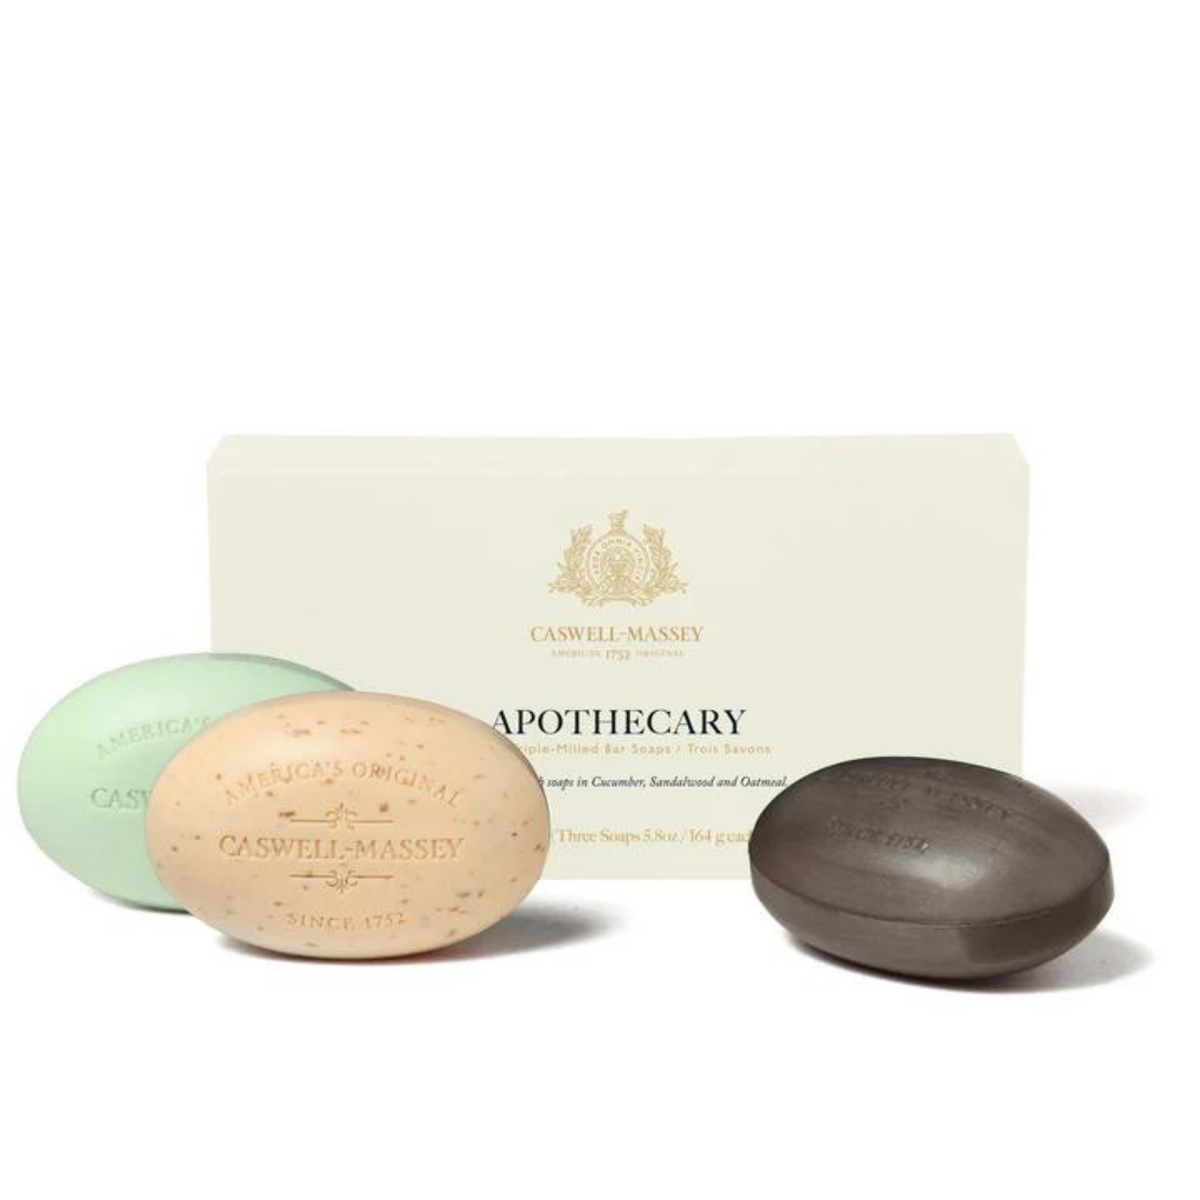 Primary Image of Apothecary 3-Soap Set (3 x 5.8 oz)